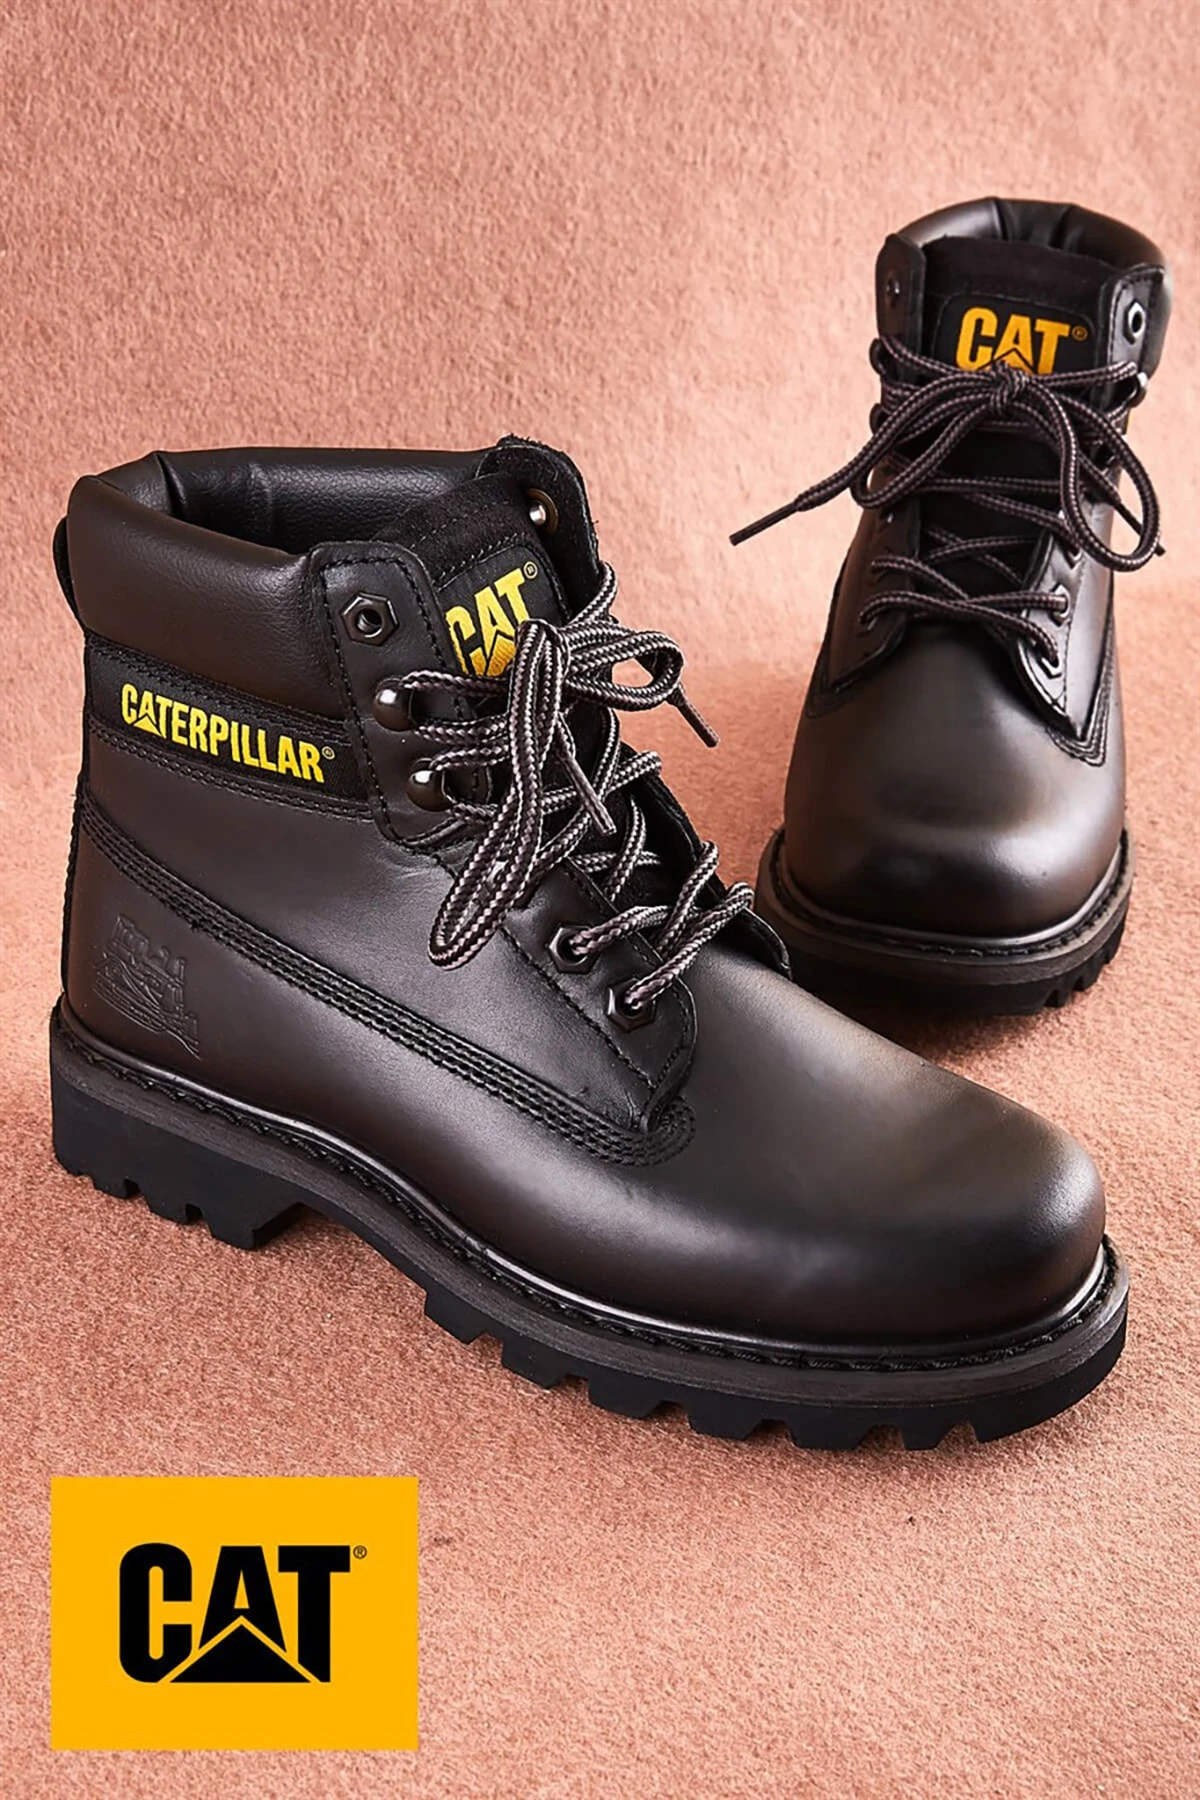 regret heat superstition Original Caterpillar Mens Shoes Black Colorado Male Boots Genuine Leather  Thick Soled Waterproof Casual Winter Brand Botas - Men's Boots - AliExpress